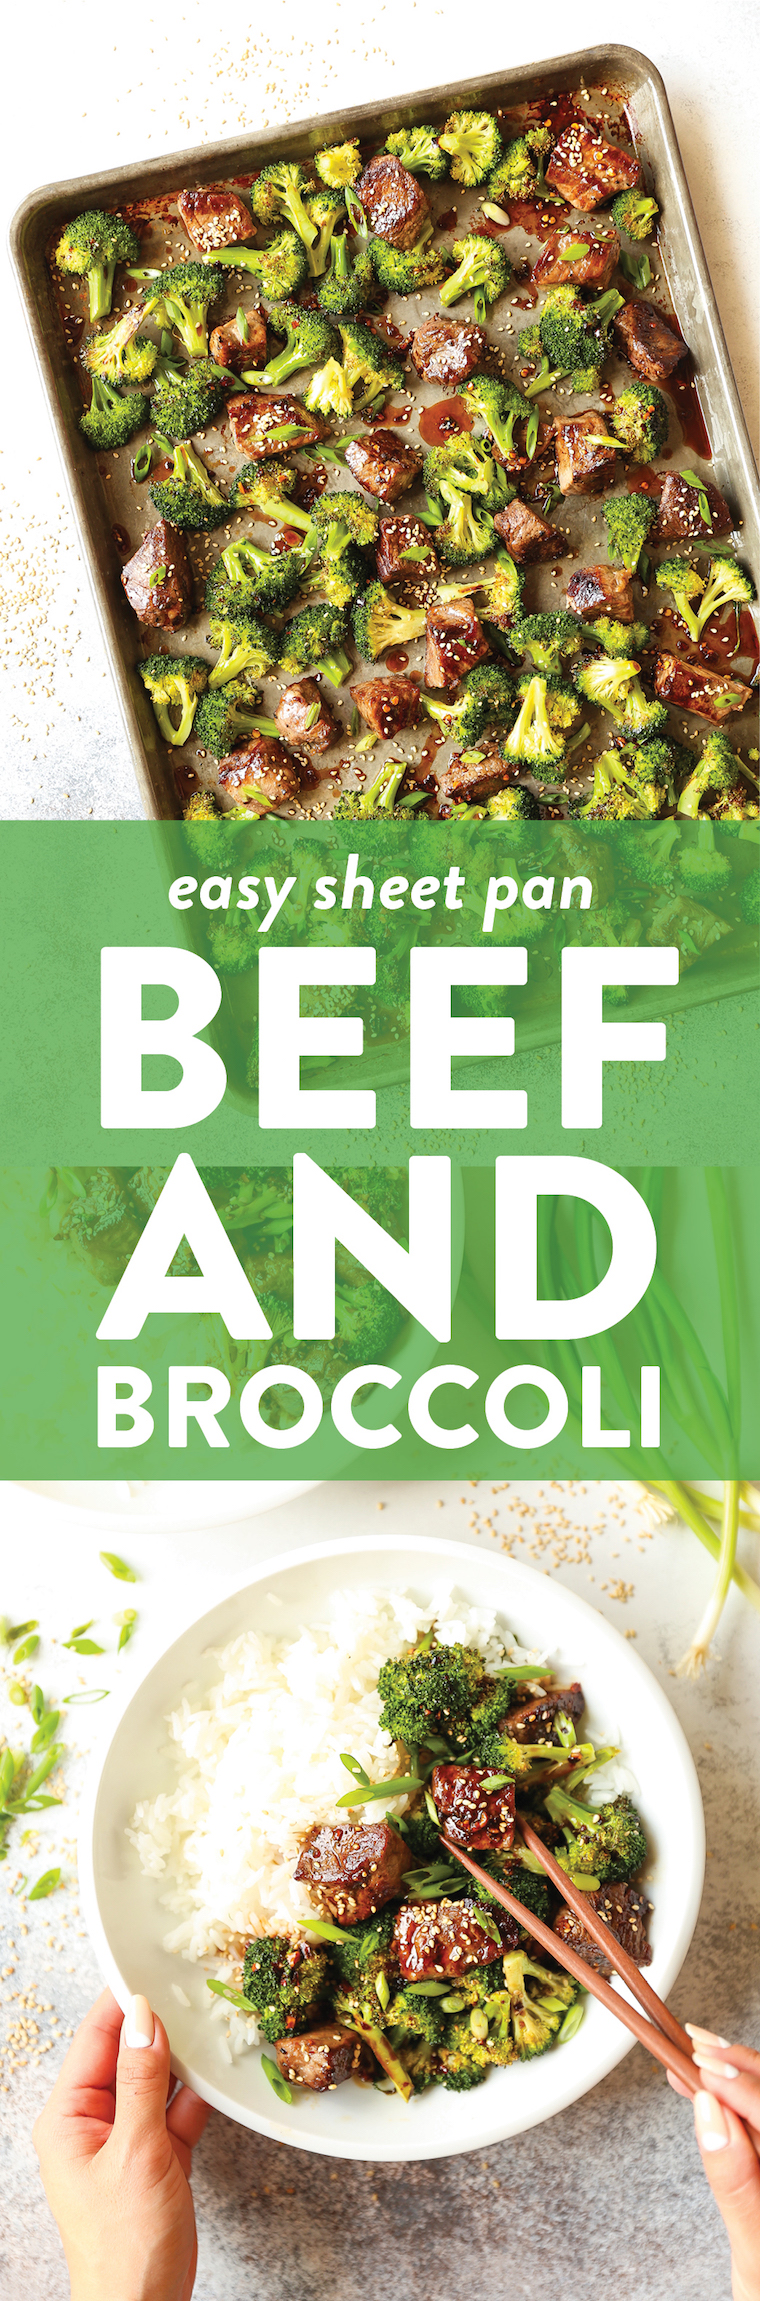 Sheet Pan Beef and Broccoli - Say hello to the easiest beef and broccoli of your life! No fuss, less dishes, yet it's 10000x better than take-out. Win-win!